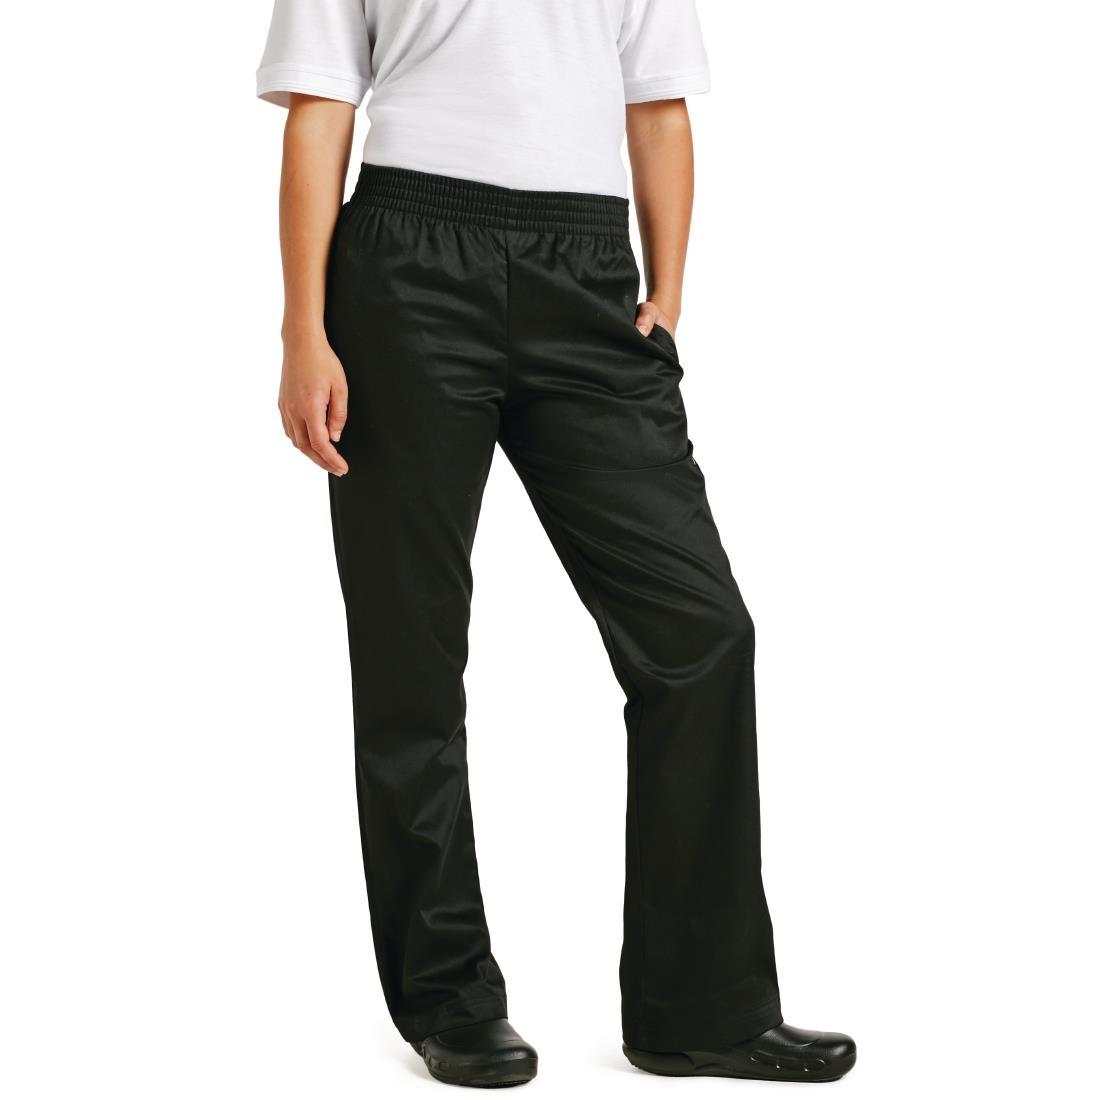 Chef Works Womens Basic Baggy Chefs Trousers Black S - B223-S  - 1